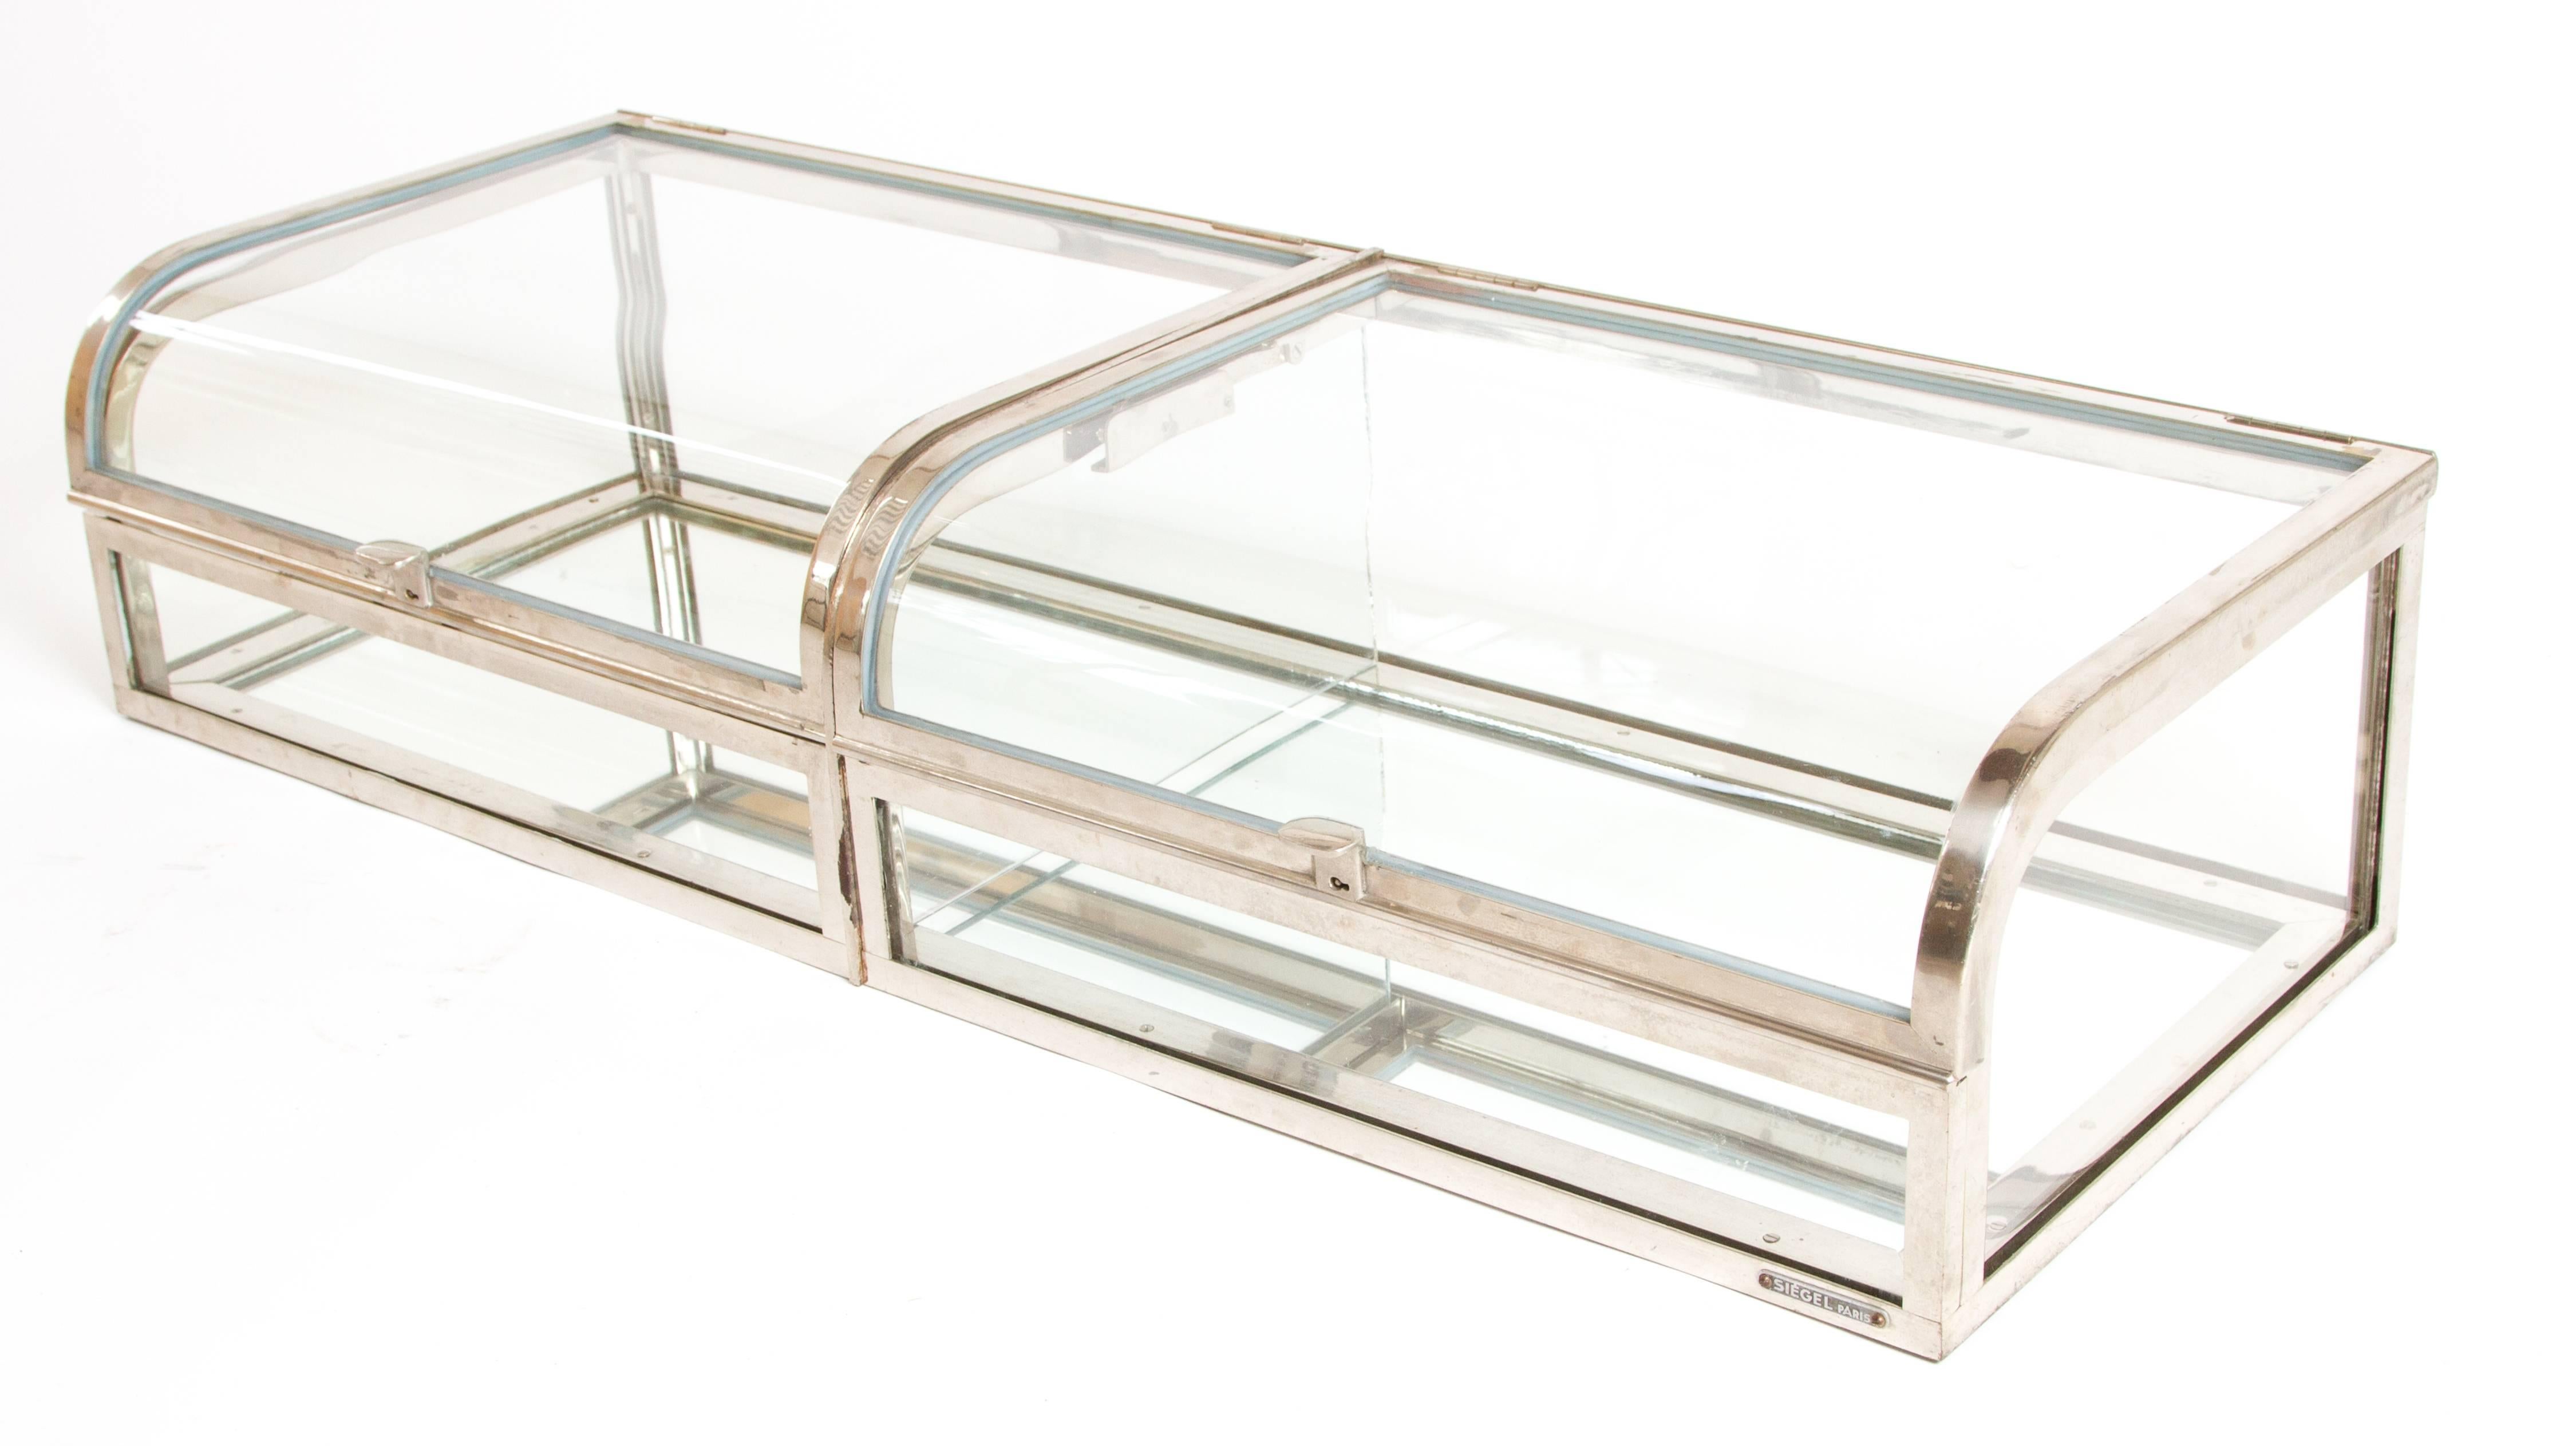 Early 19th century Siégel å Paris nickeled brass and curved glass double display case. Mirrored glass bottom. Stunning display case.
Measures: 38